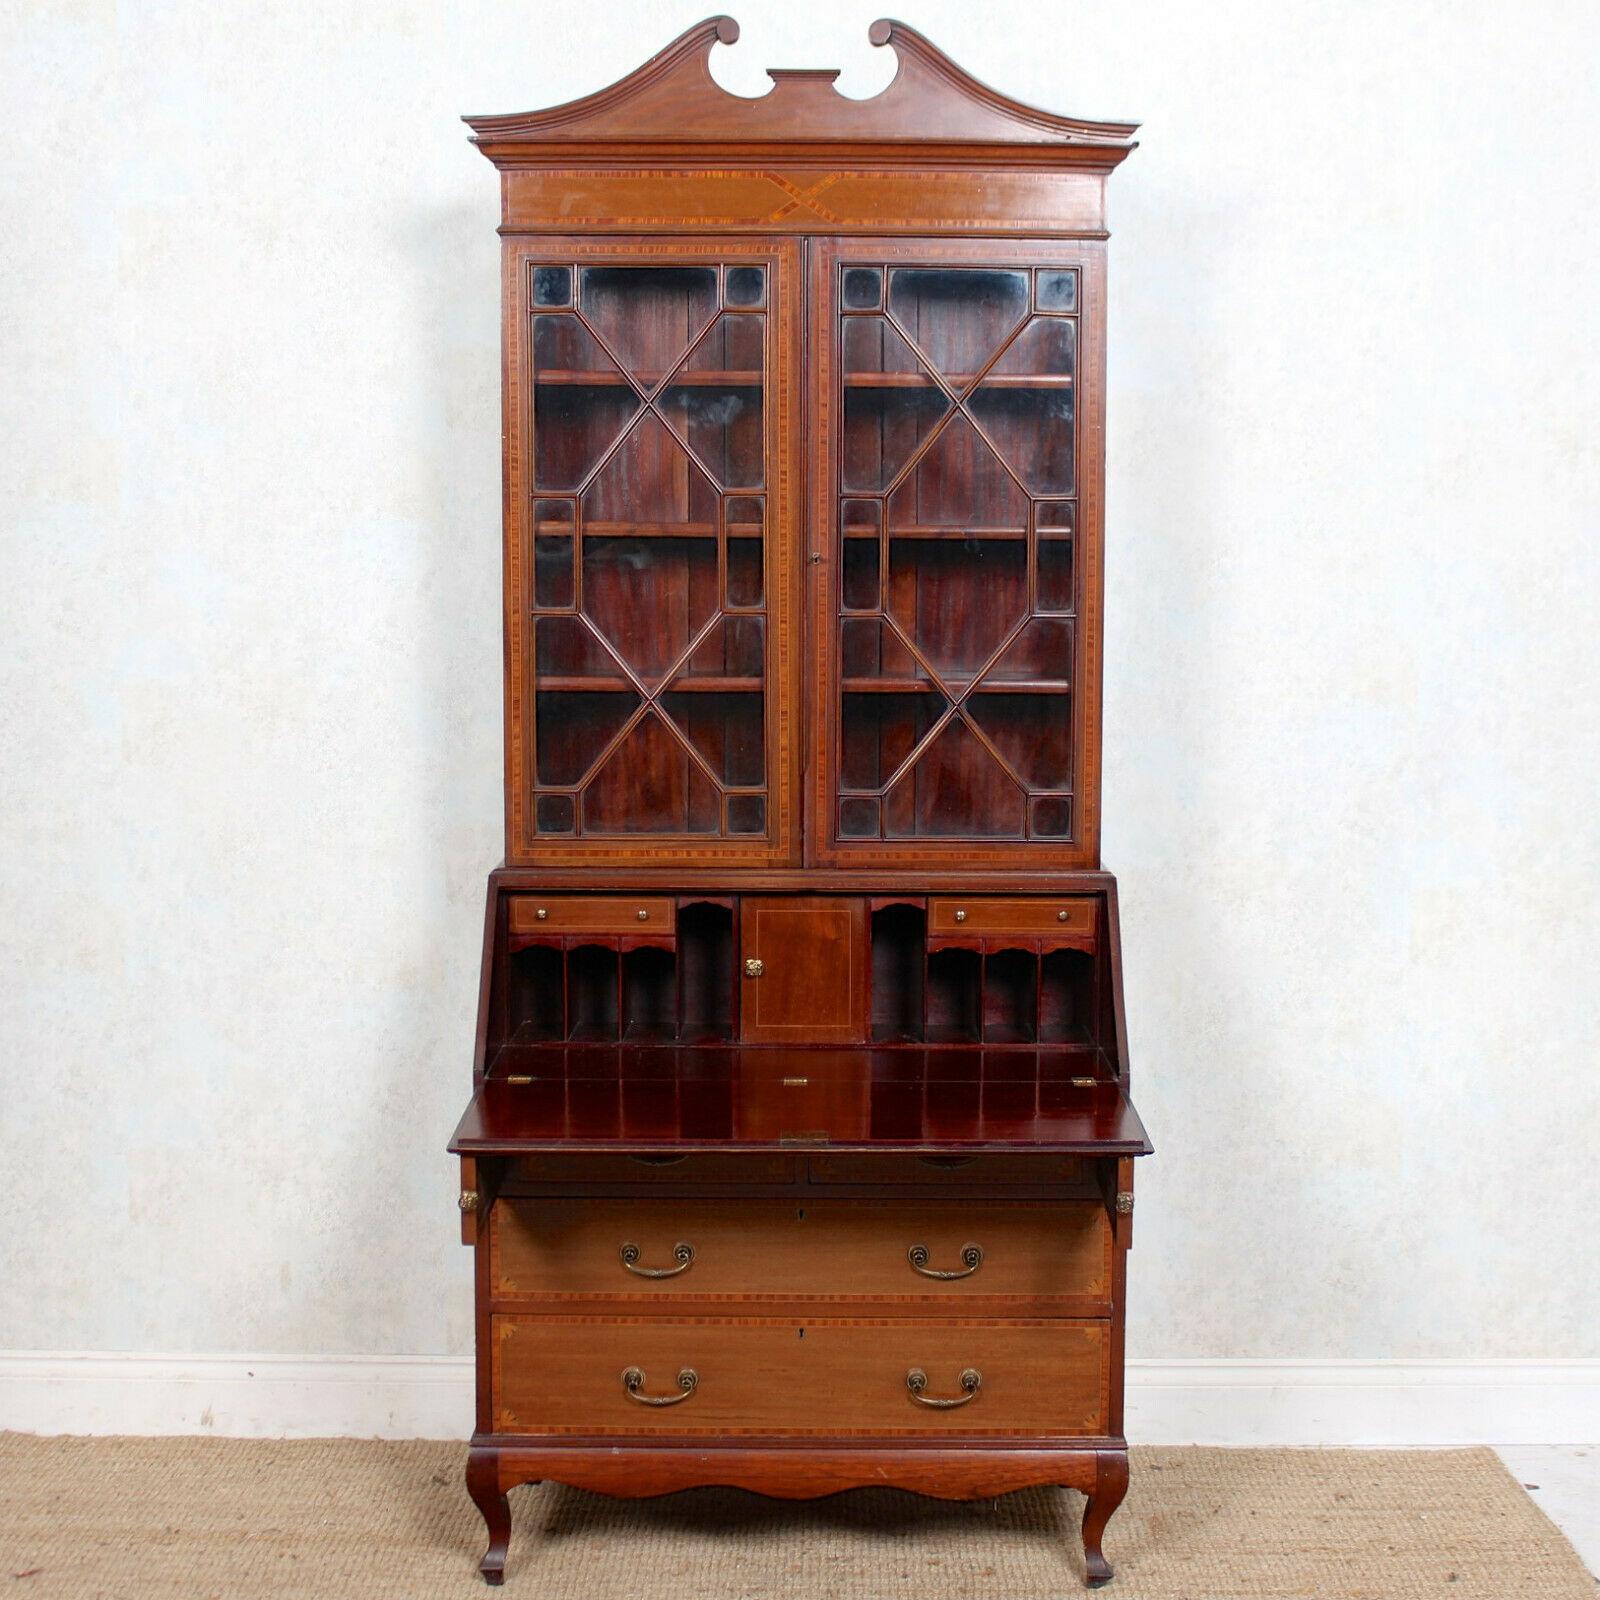 An attractive Edwardian satinwood banded inlaid mahogany glazed secretaire.

The mahogany boasting a well figured flamed grain and rich patina.

The upper section with a built-in arched scroll pediment above double astragal glazed doors enclosed